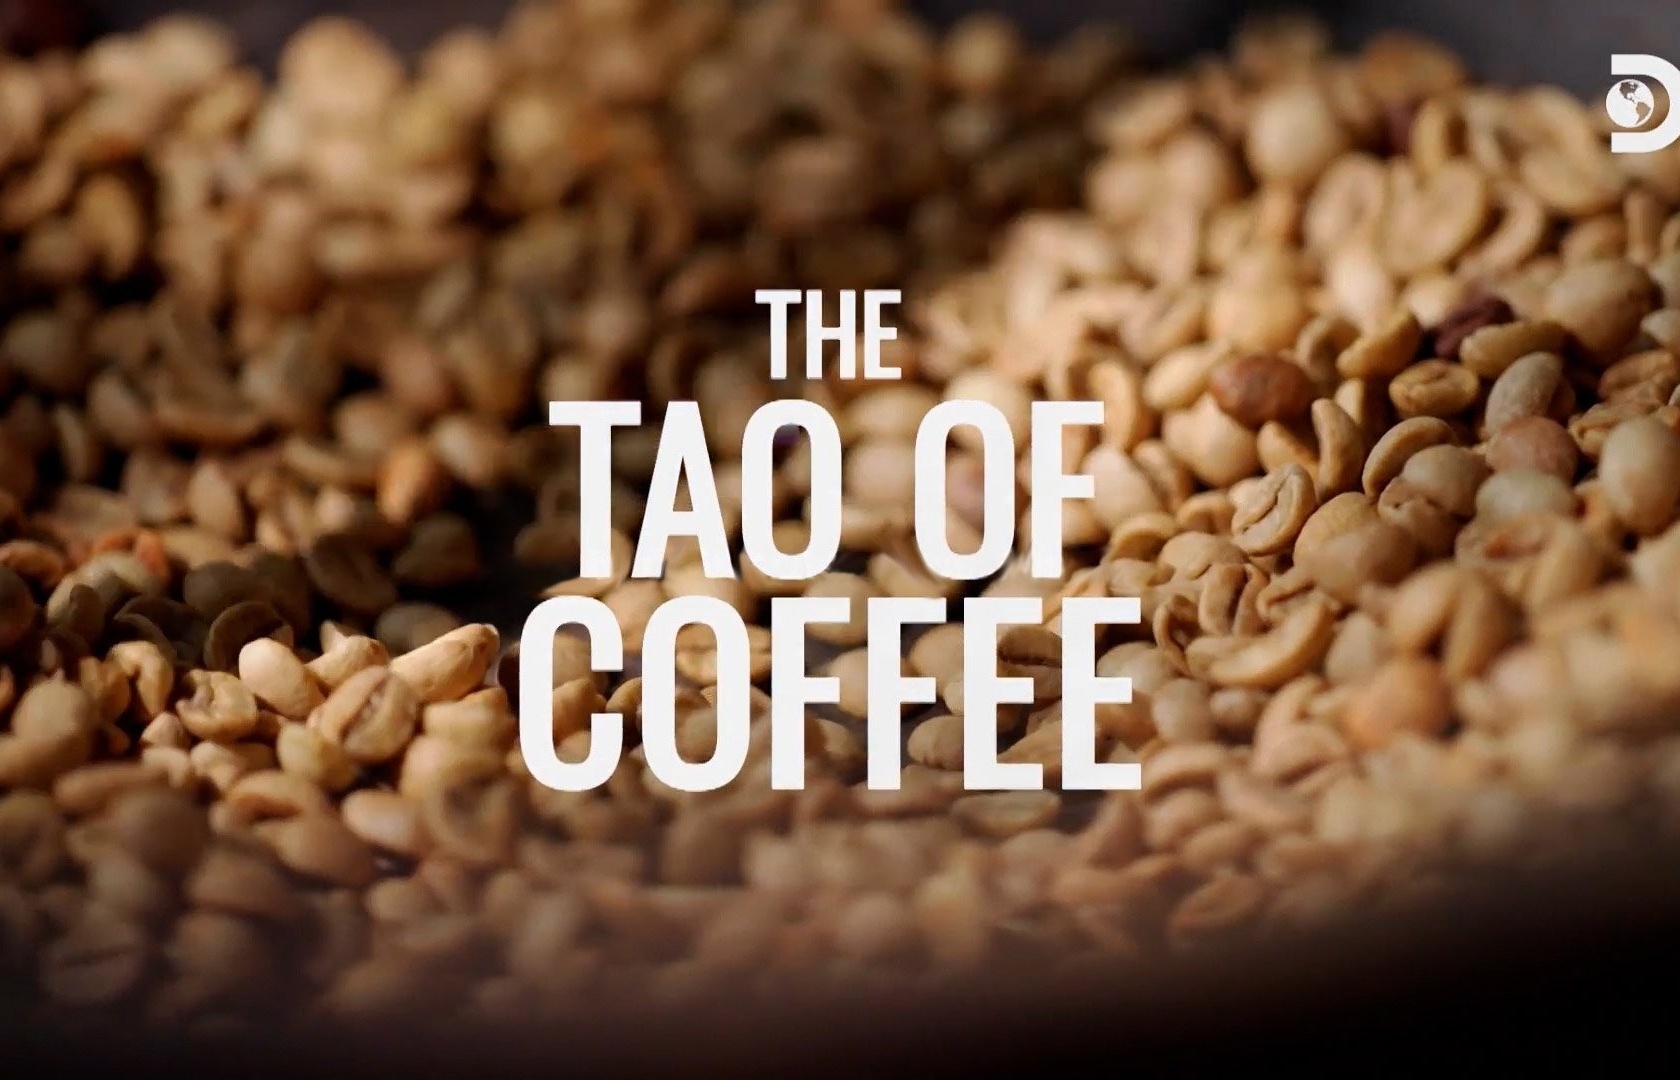 The Tao of Coffee by Warner Bros. Discovery promotes Vietnamese coffee